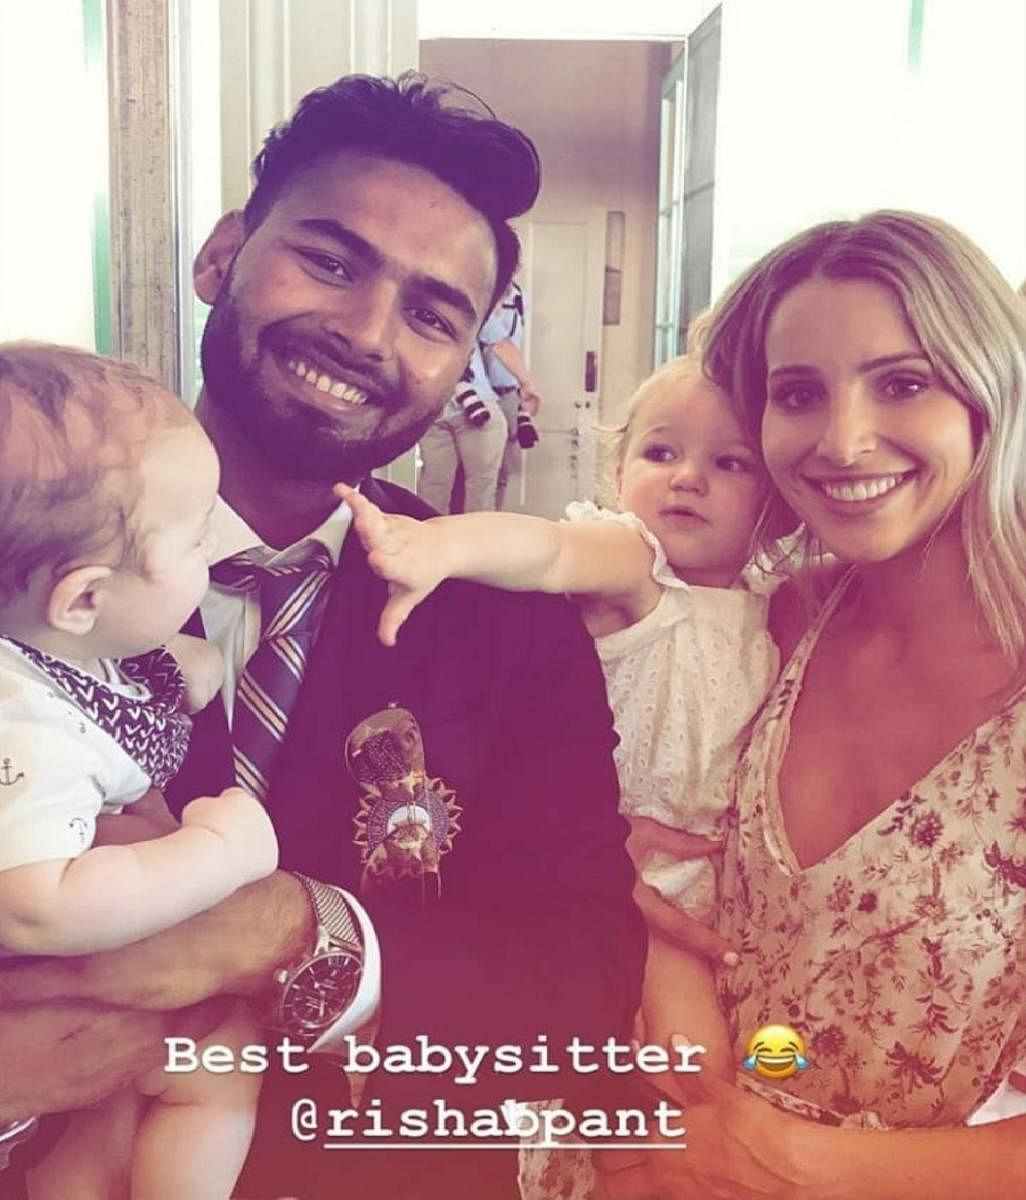 Australia captain Tim Paine's wife Bonnie Paine (left) posted this picture in her Instagram, calling Rishab Pant 'best babysitter.'